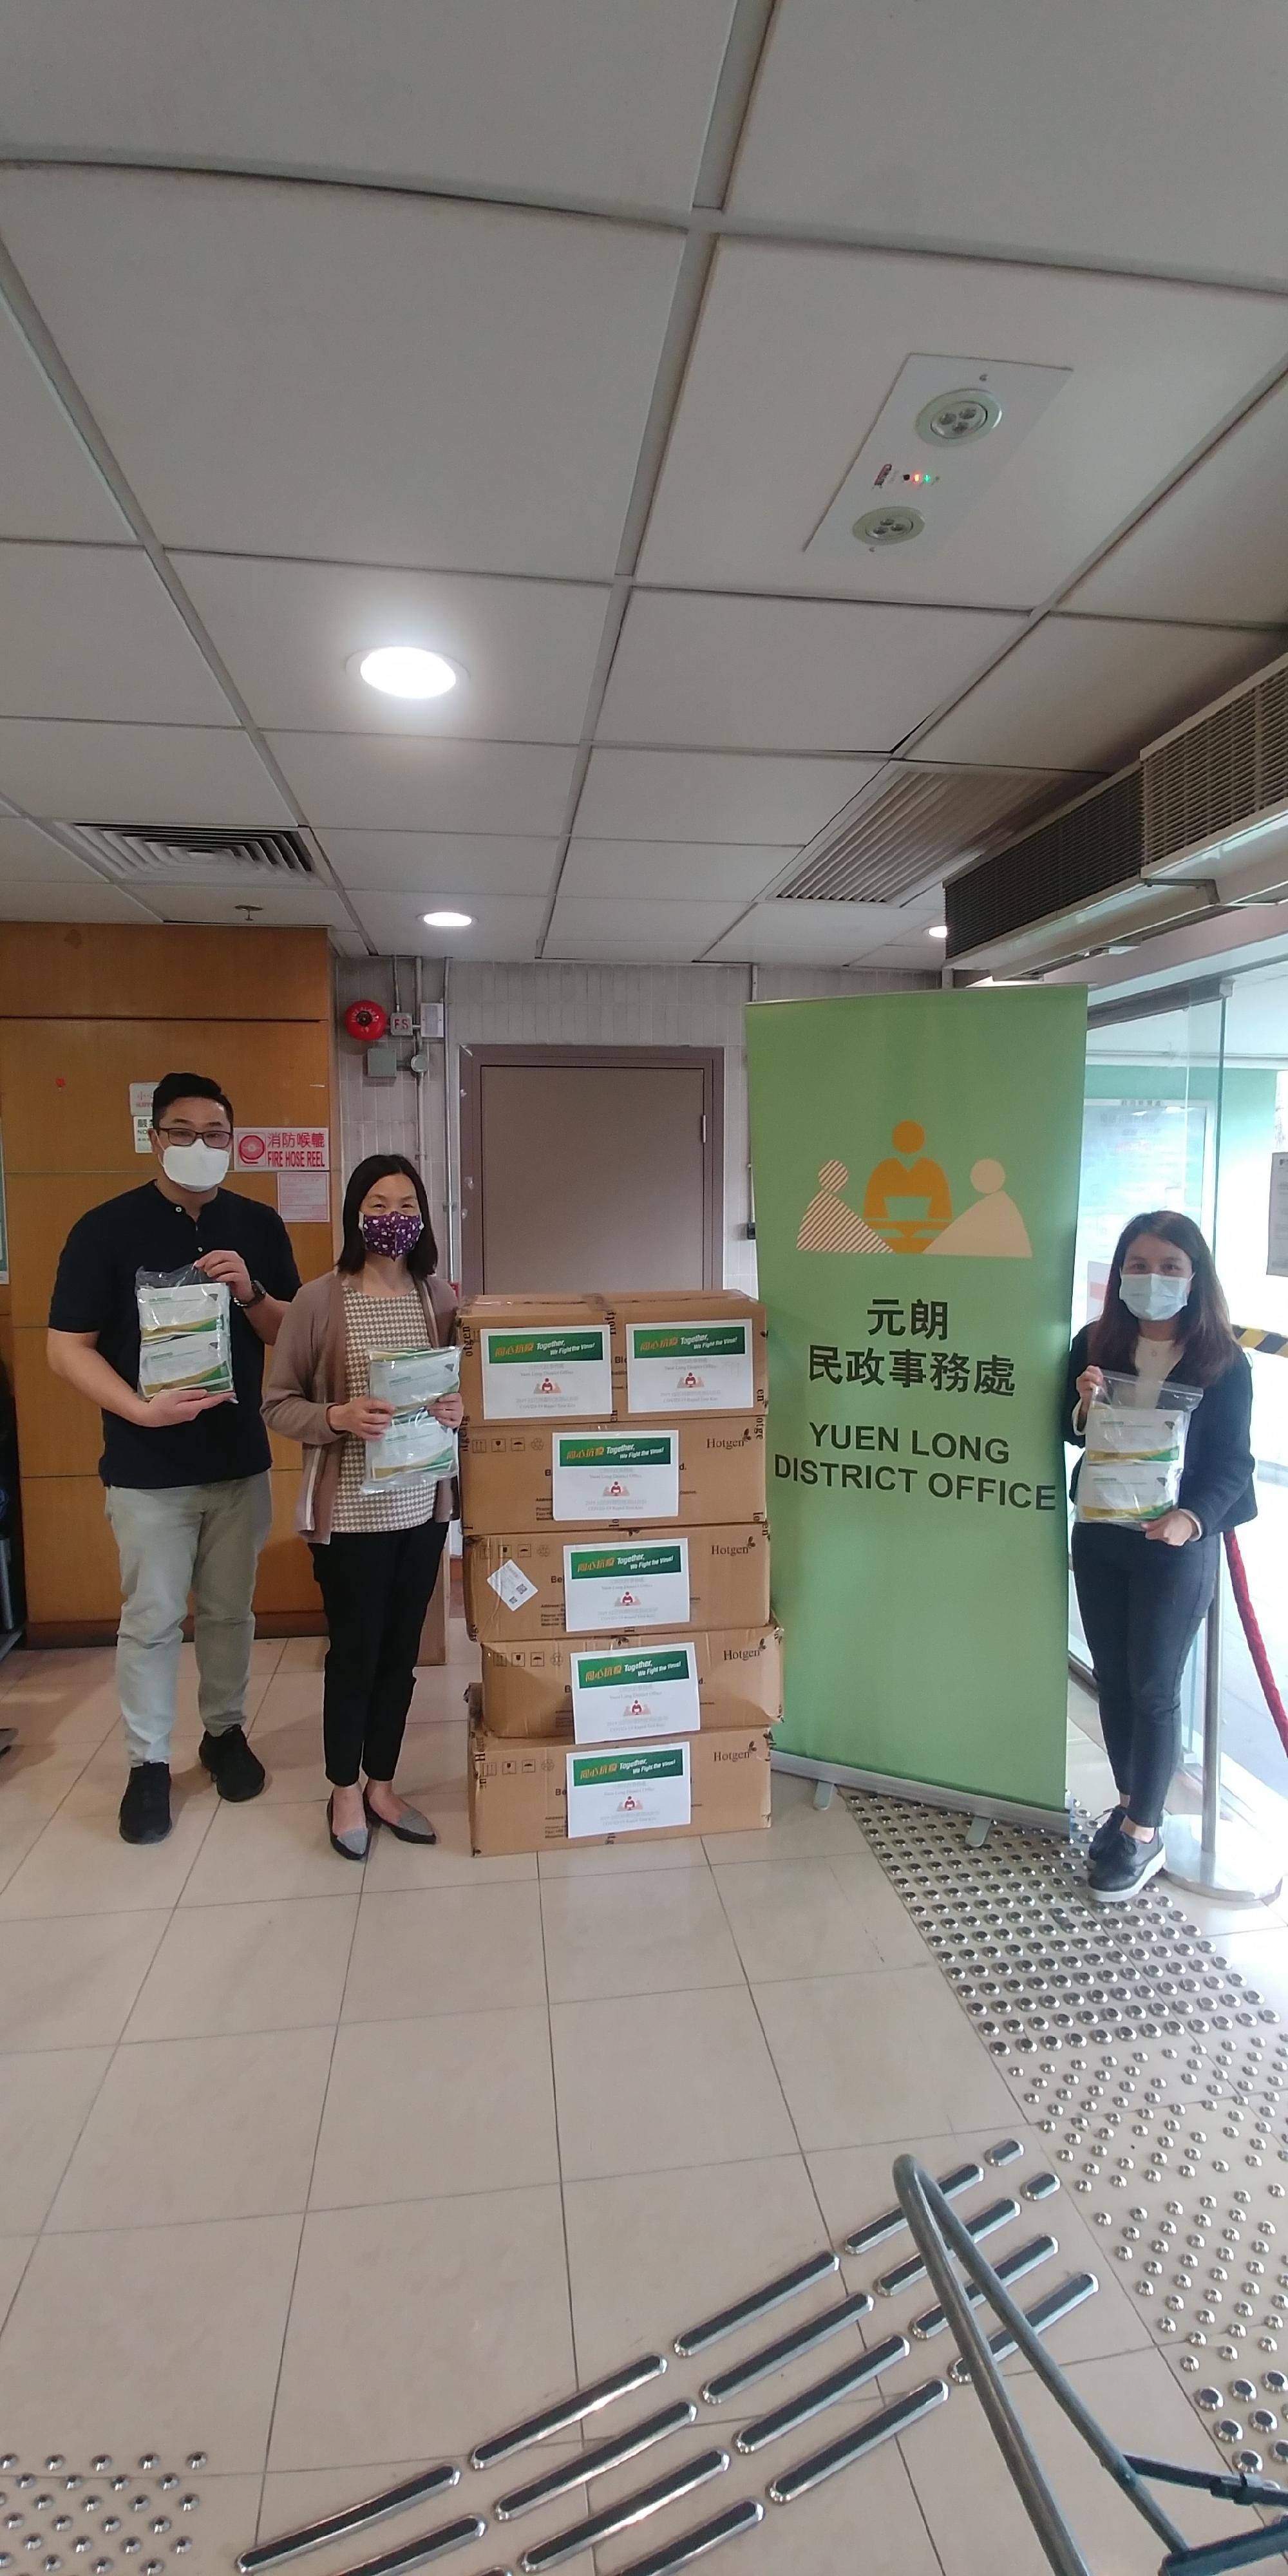 The Yuen Long District Office today (March 12) distributed COVID-19 rapid test kits to households, cleansing workers and property management staff living and working in Tin Shui (I) Estate and Tin Shui (II) Estate for voluntary testing through the Housing Department and the property management companies.